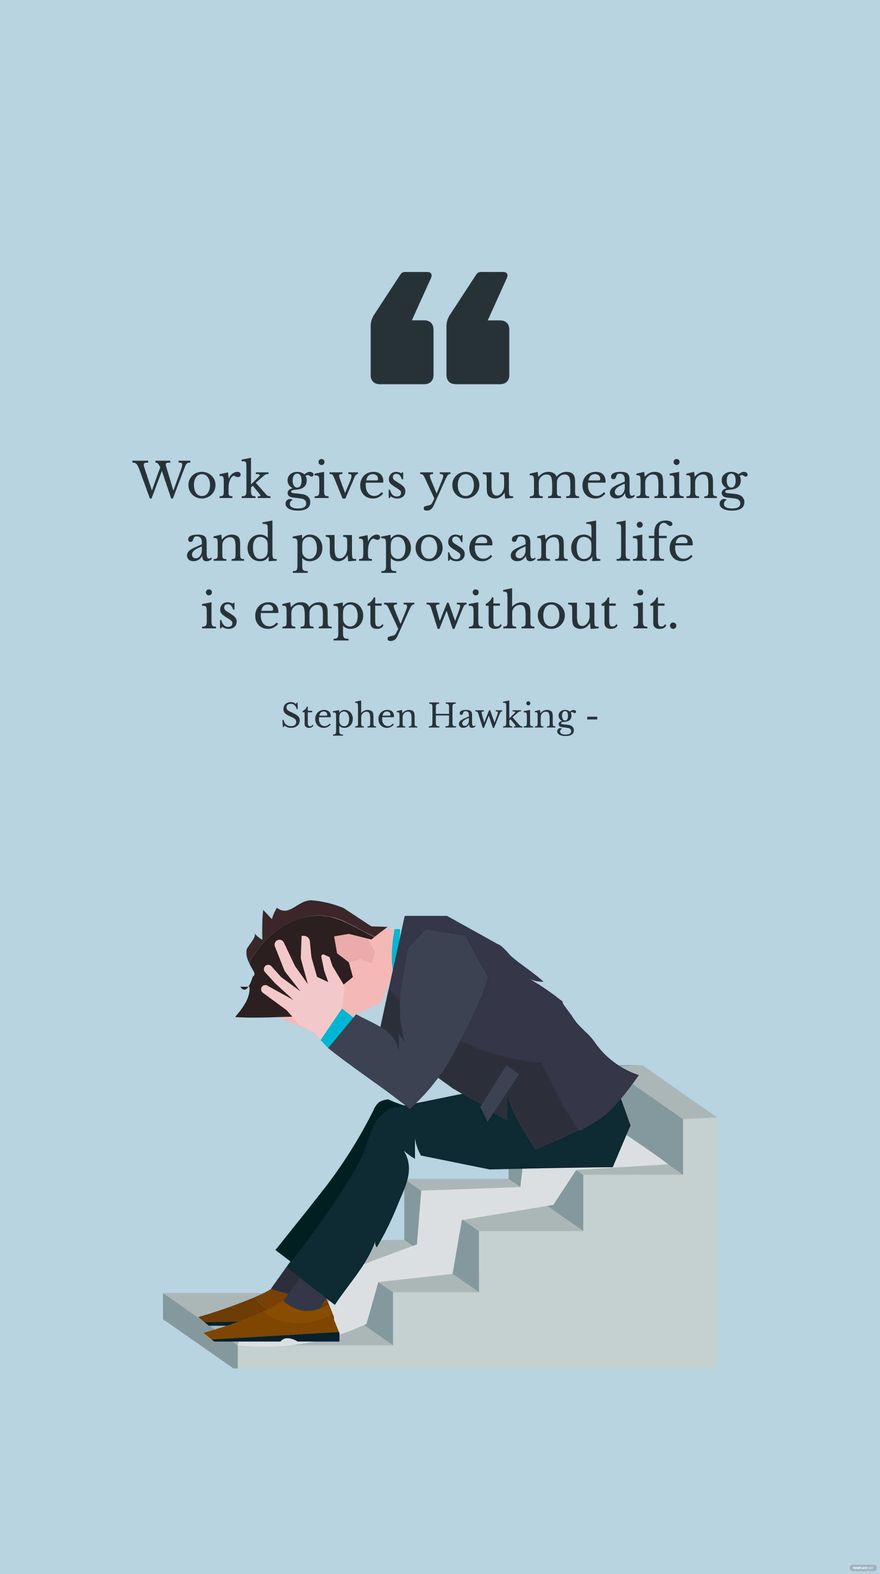 Stephen Hawking - Work gives you meaning and purpose and life is empty without it. in JPG